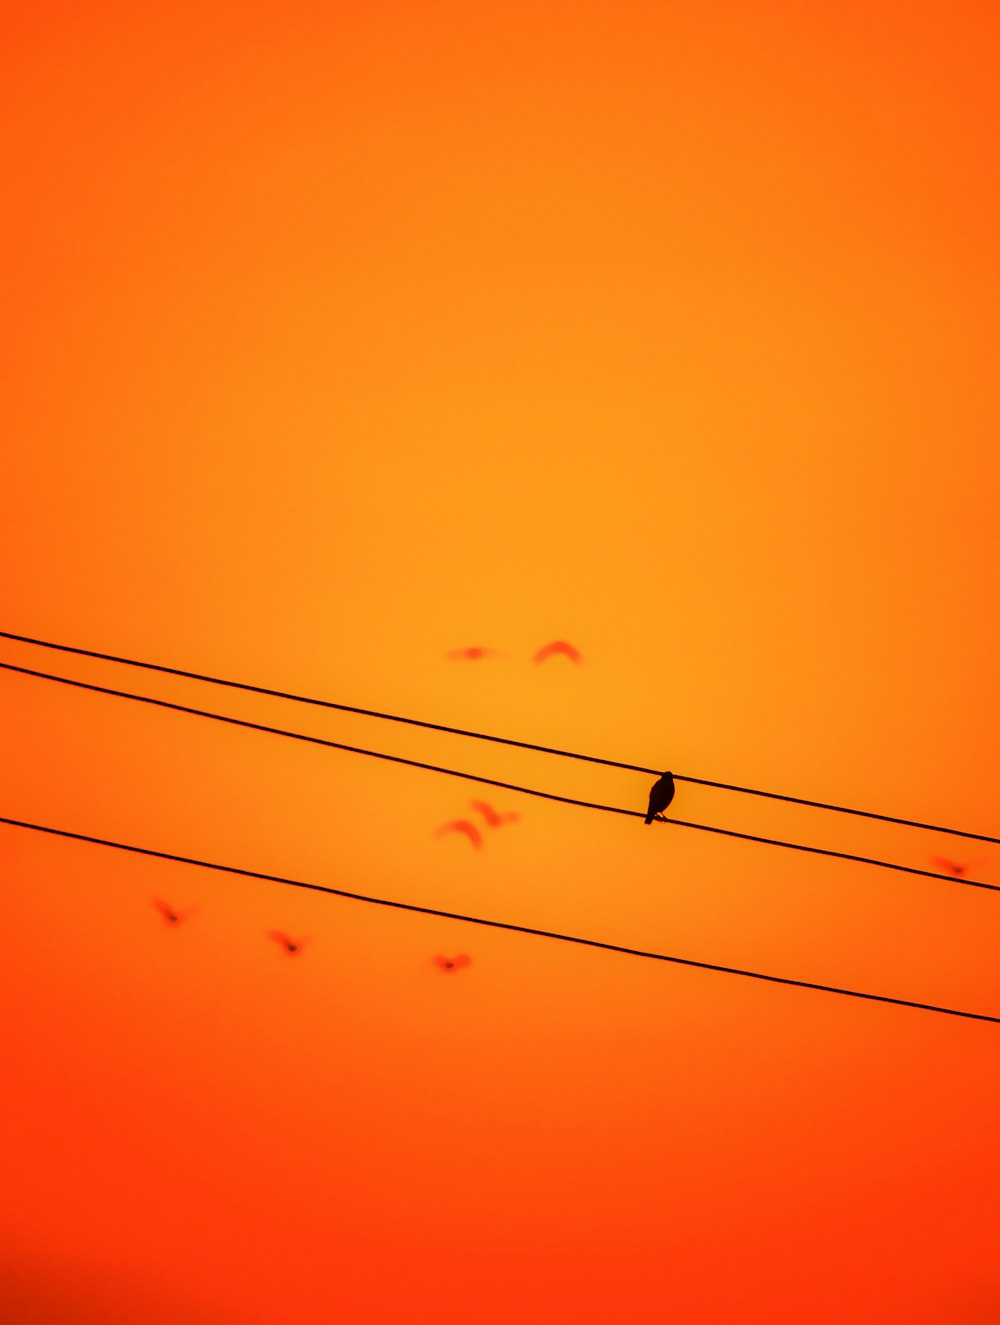 bird perched on line